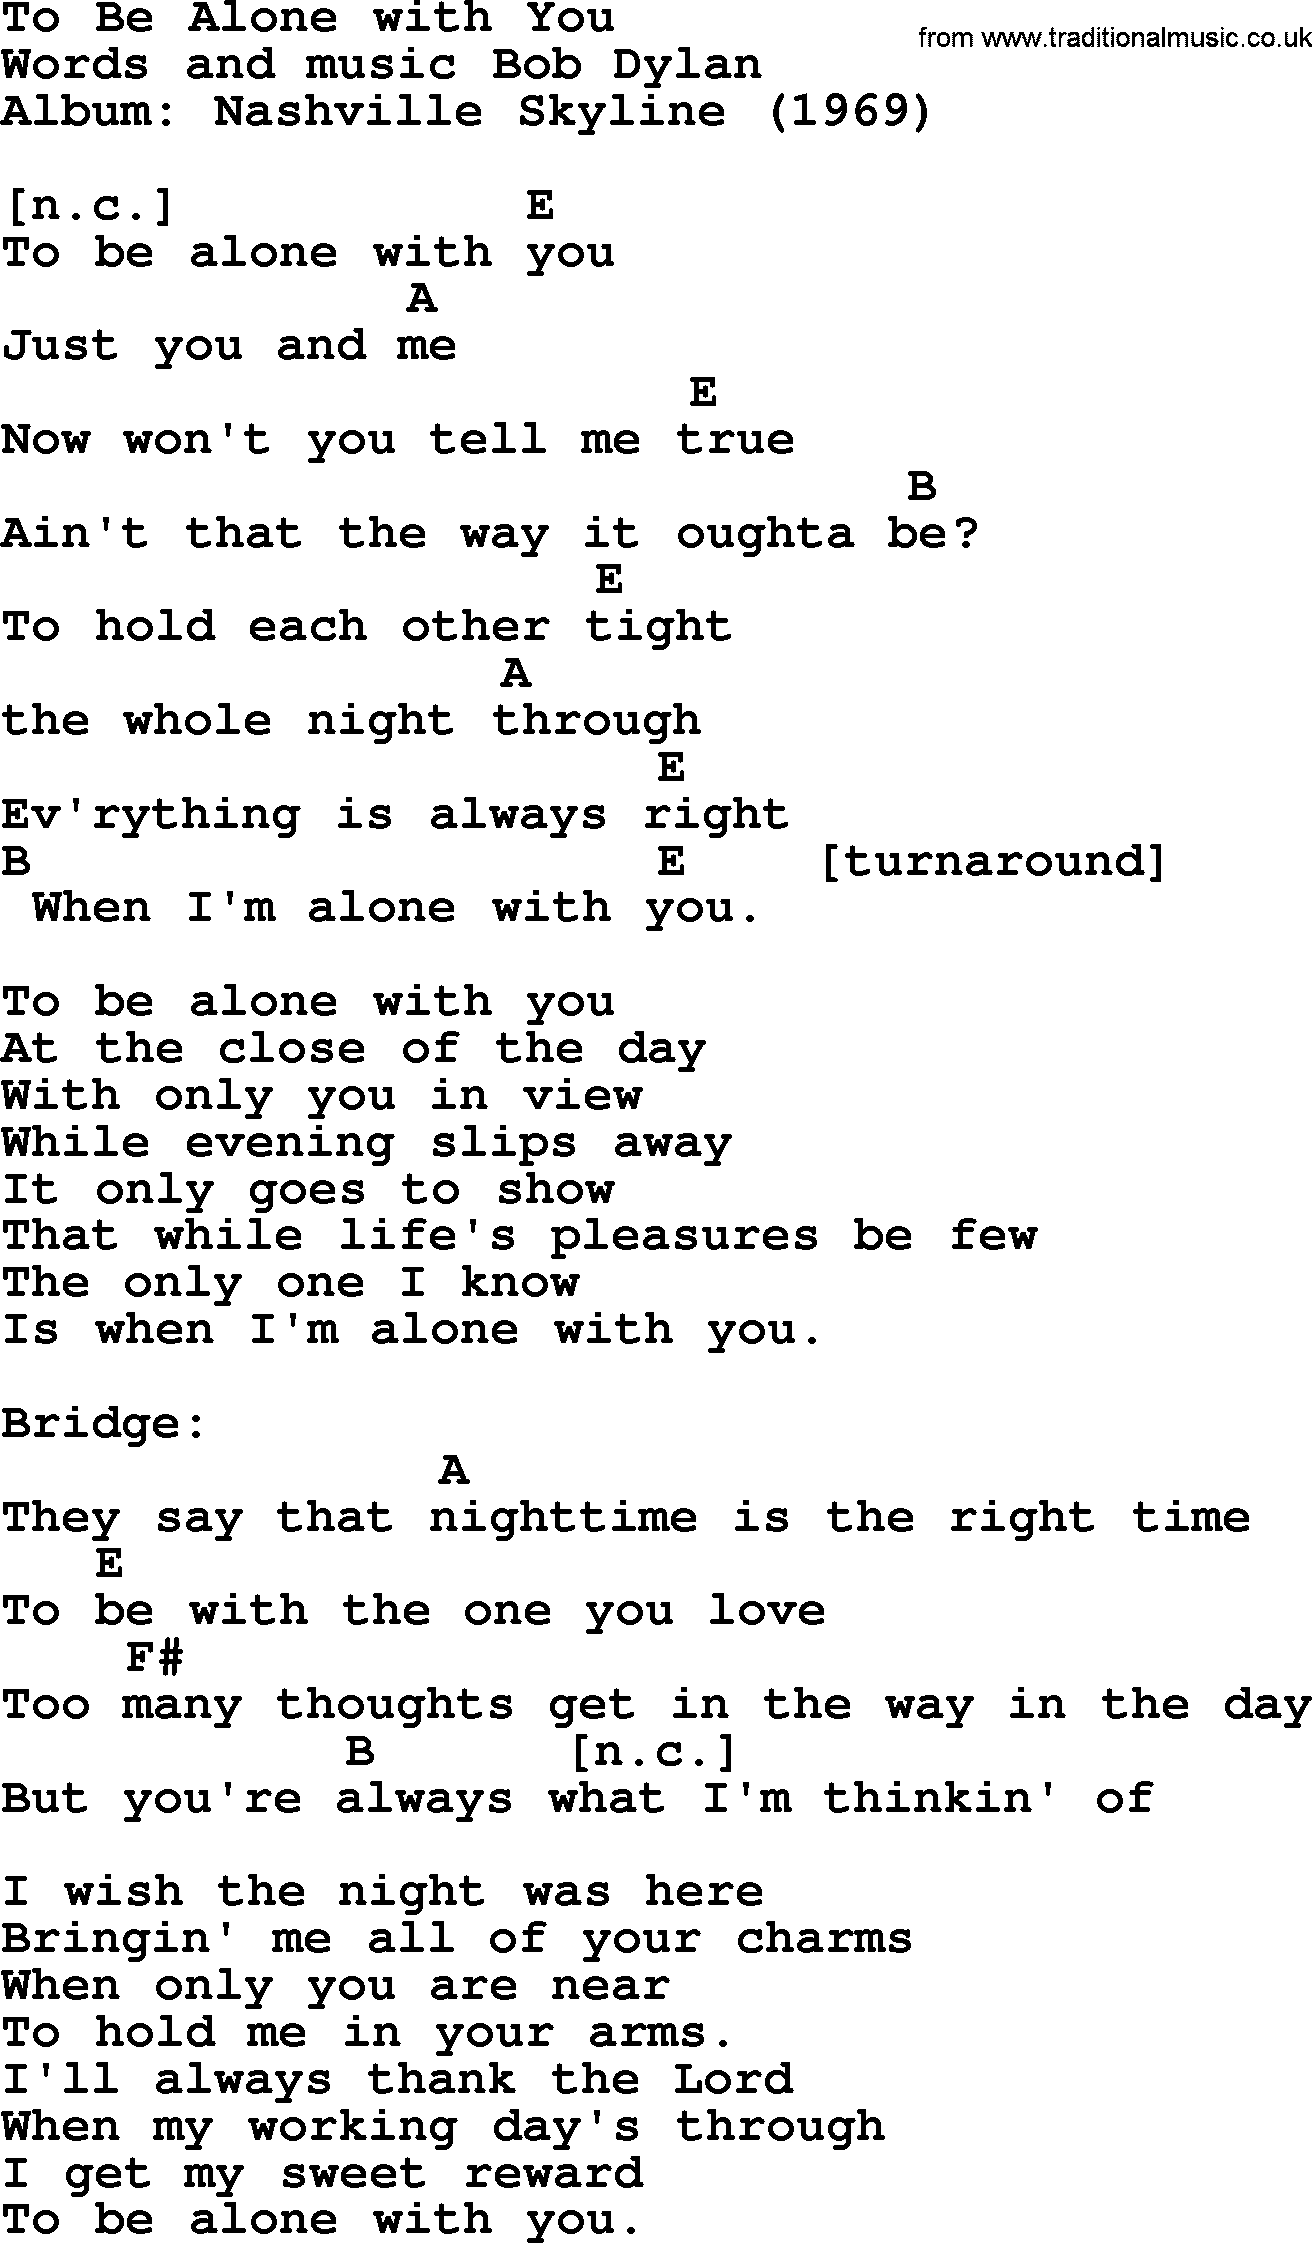 Bob Dylan song, lyrics with chords - To Be Alone with You